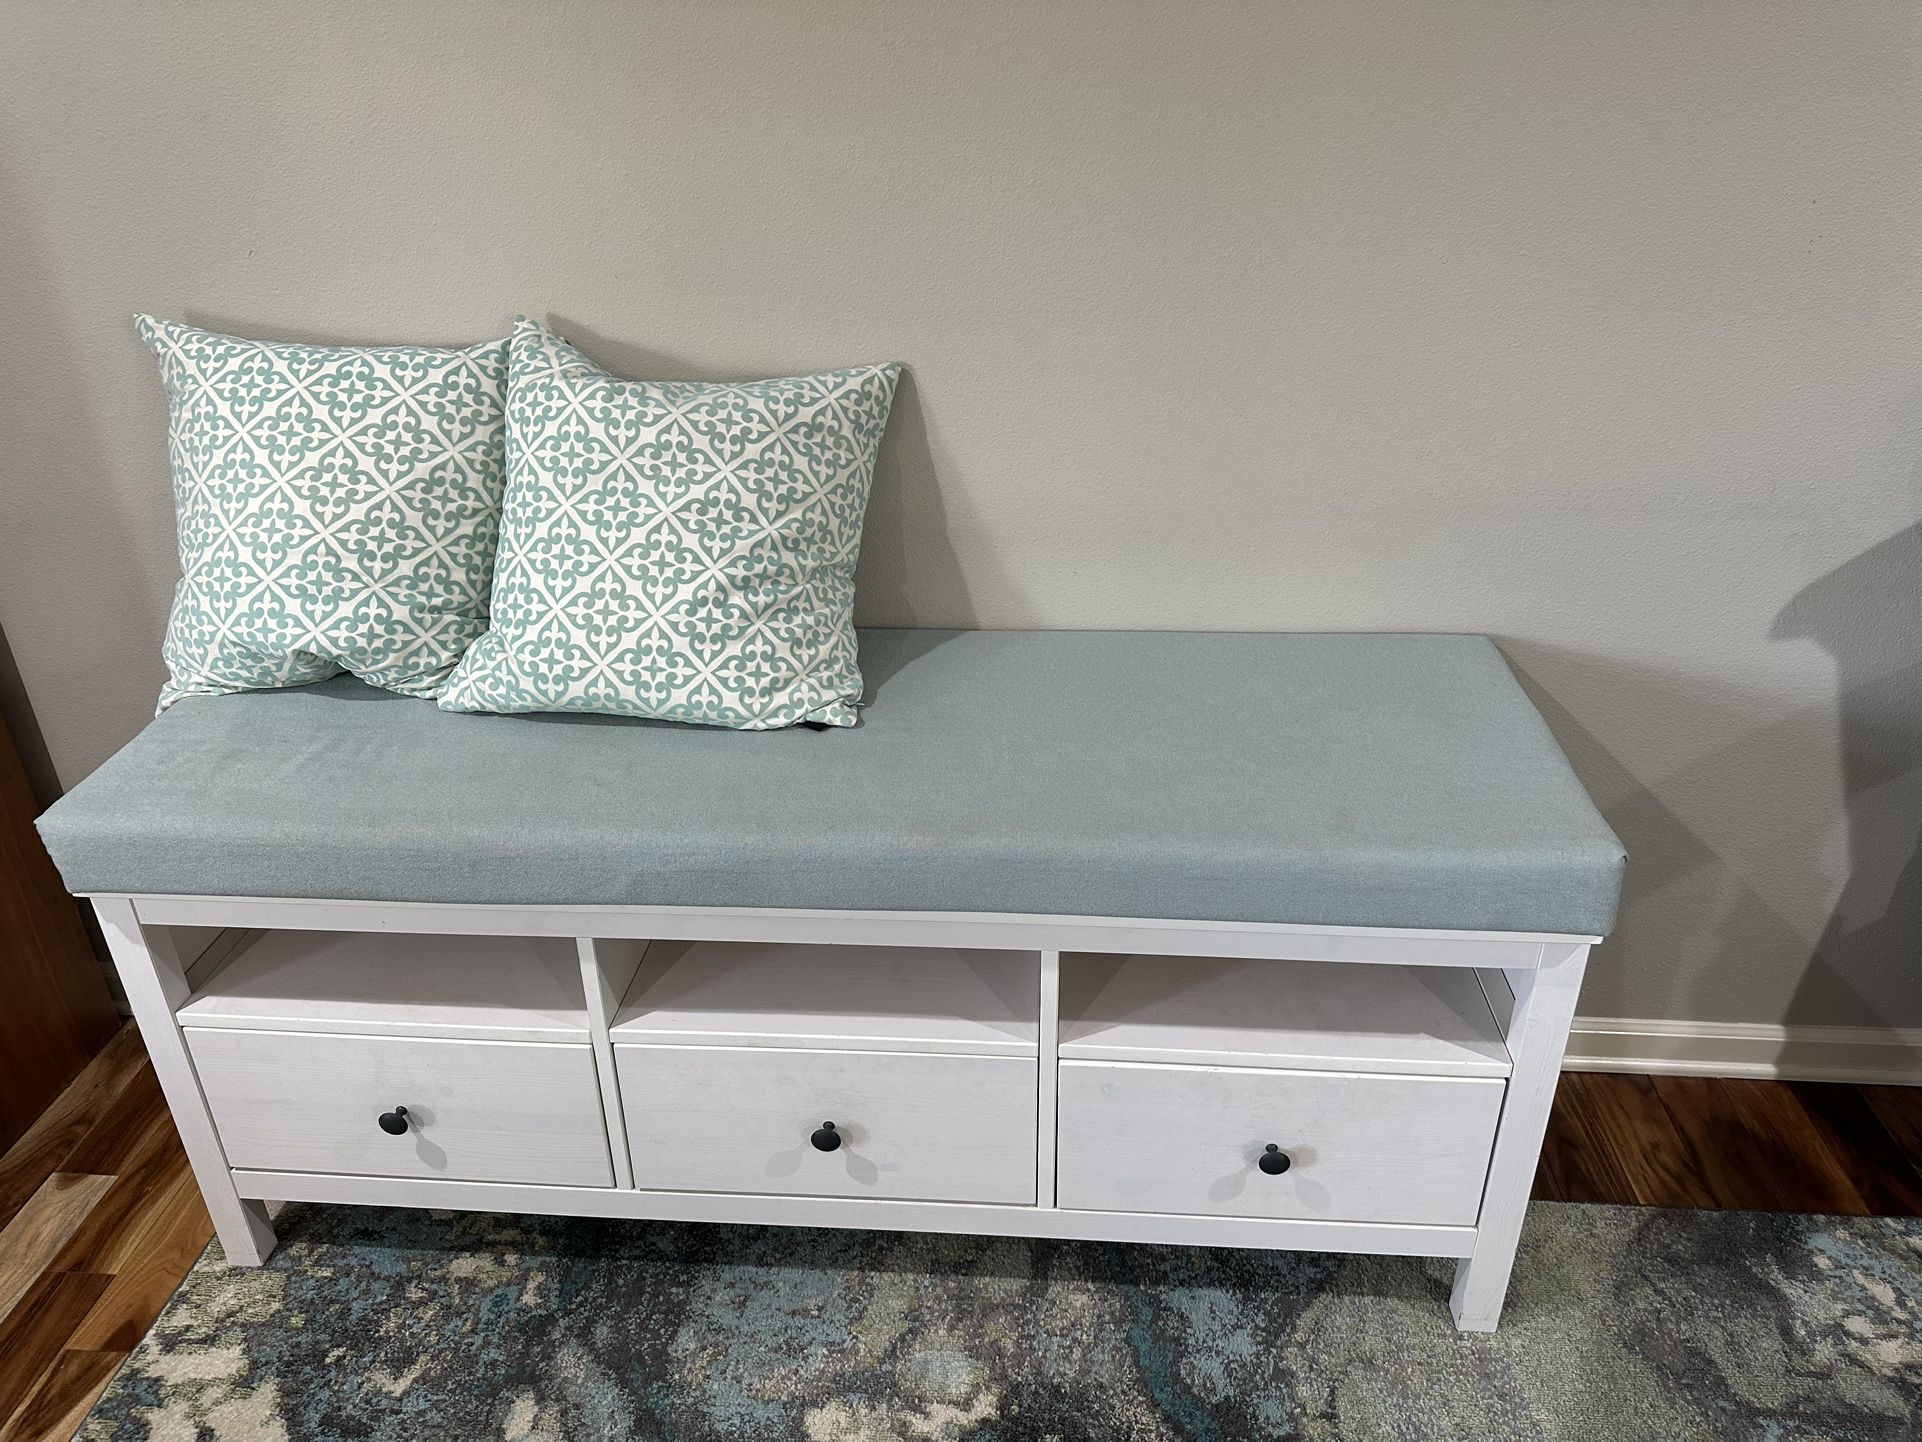 IKEA Hemnes console table with custom removable upholstered foam bench top